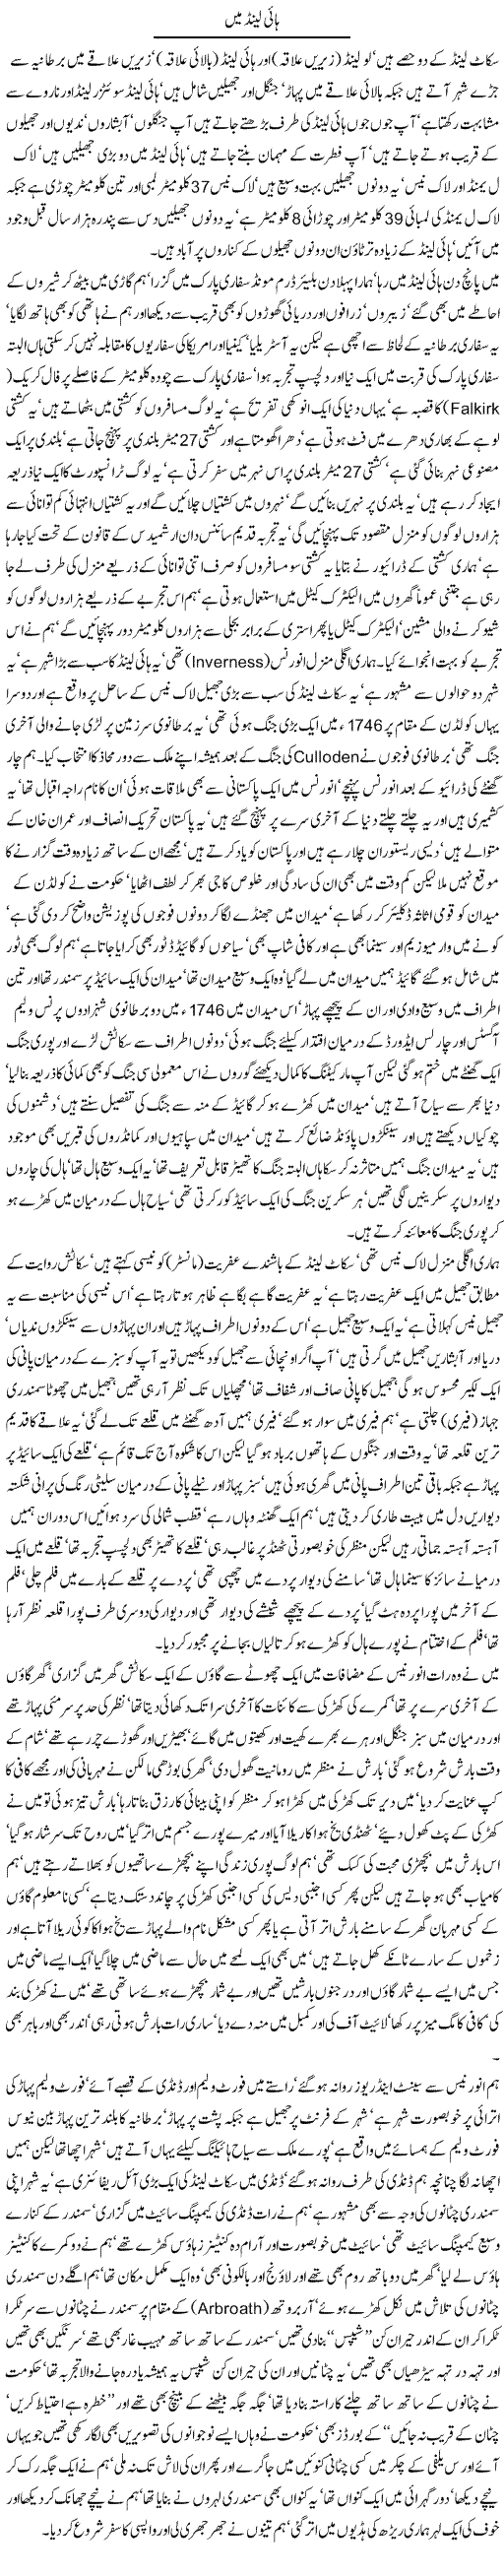 High Land Se By Javed Chaudhry